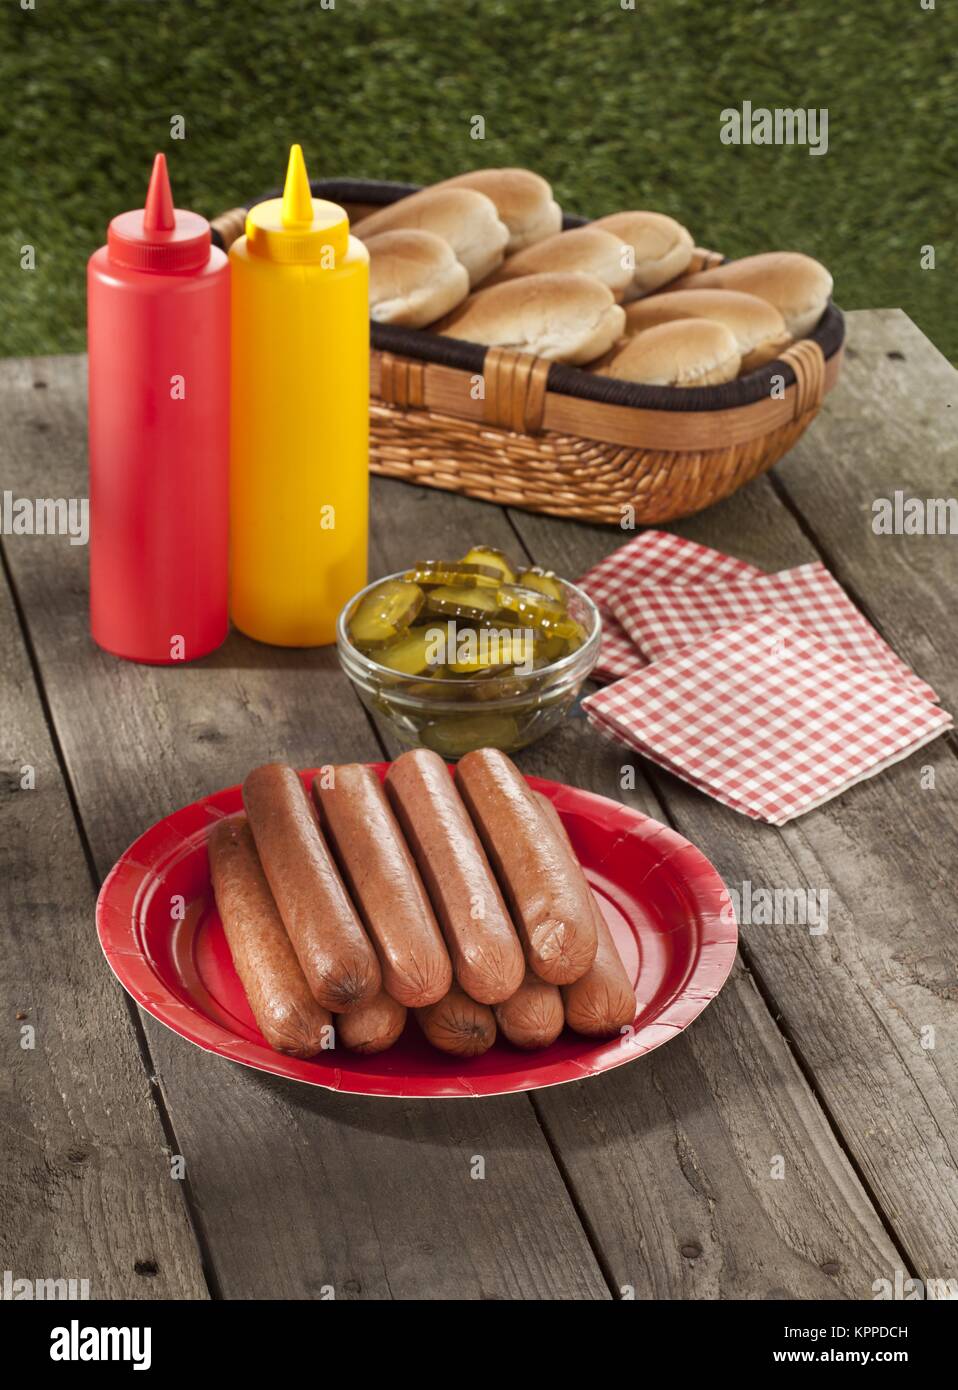 hot dogs buns and condiments Stock Photo